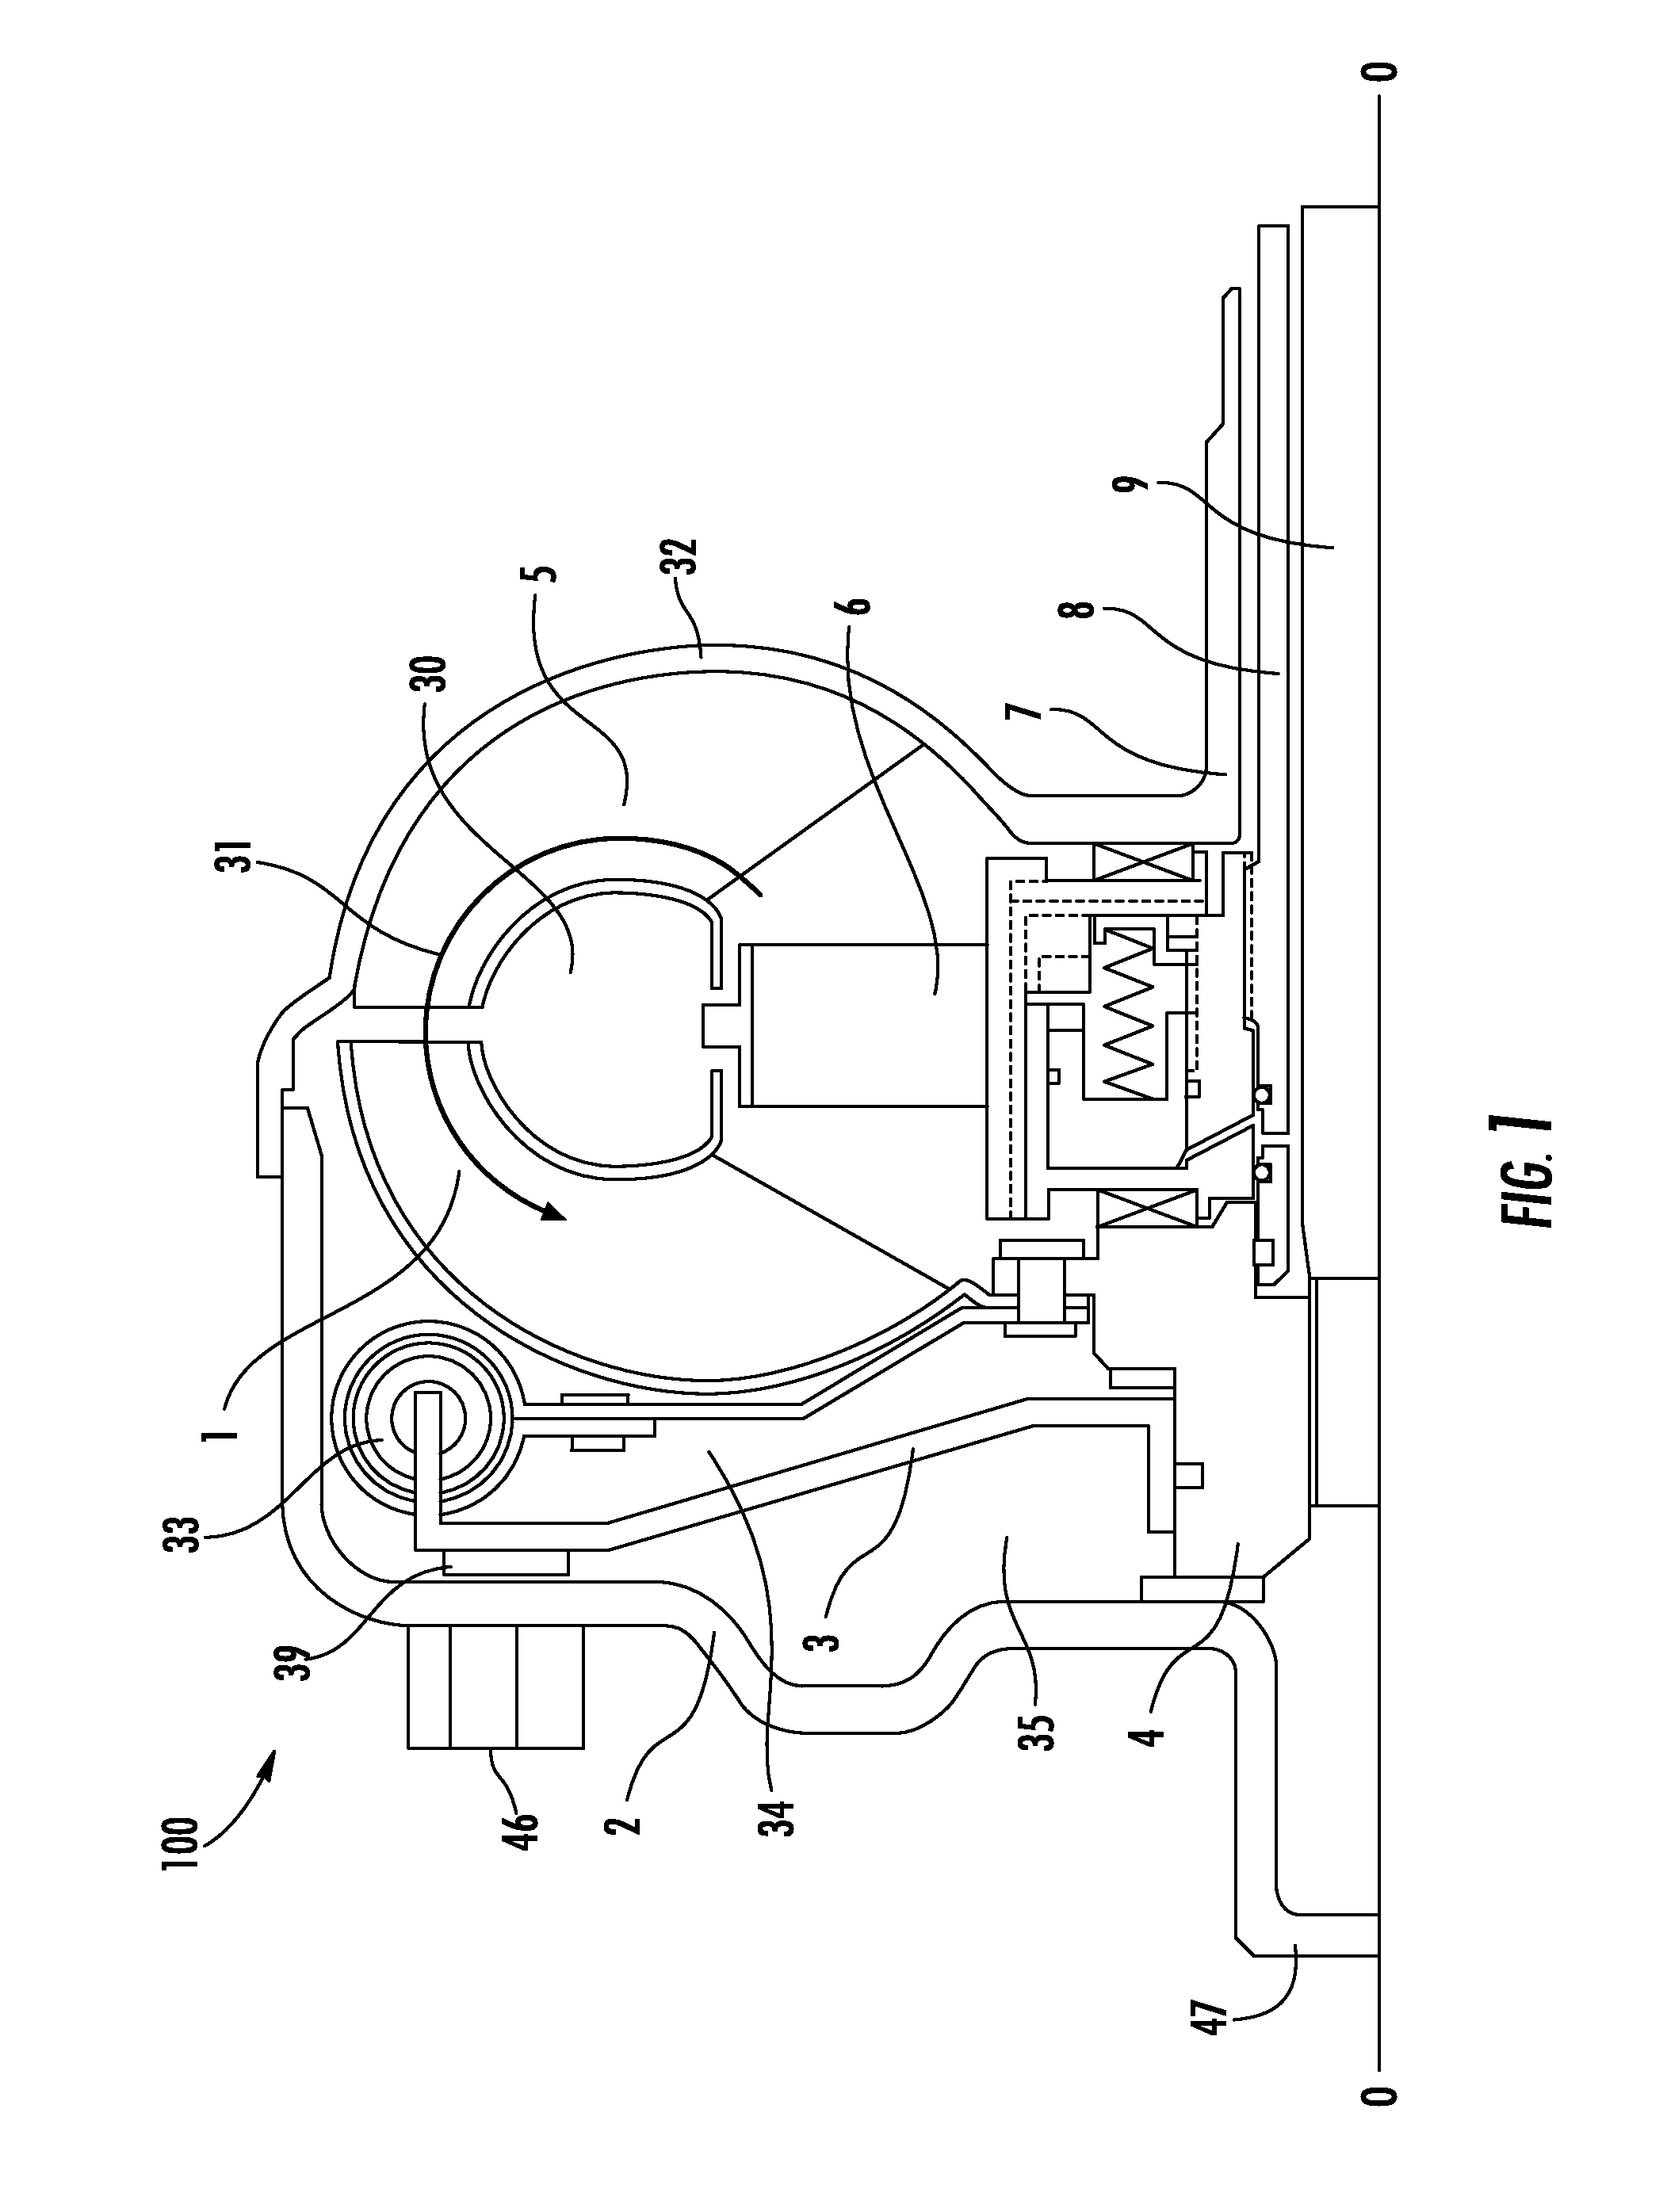 Torque converter having a reactor controlled by a jaw clutch